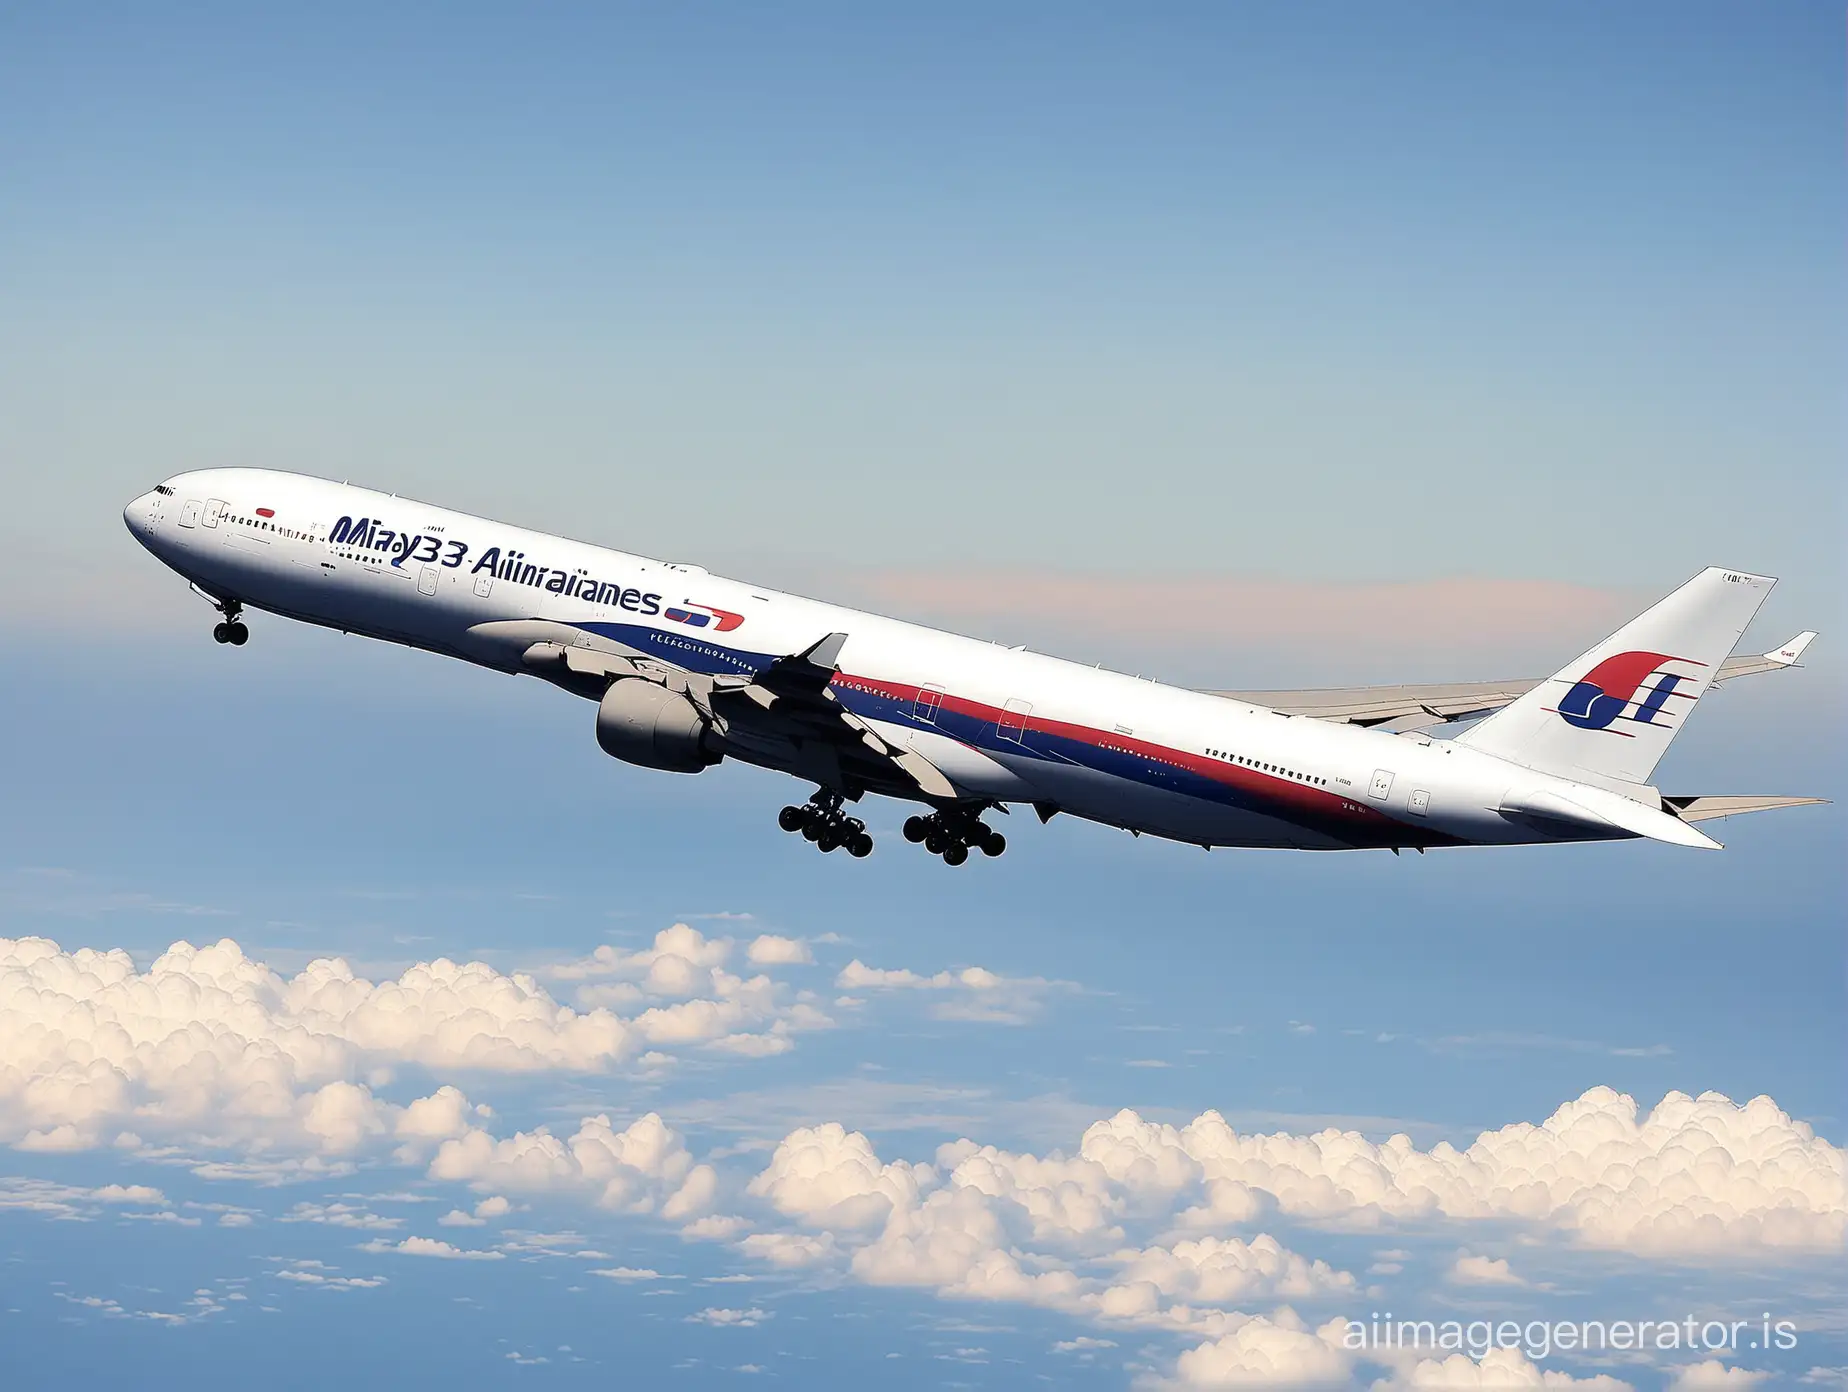 the disappearance of Malaysia Airlines Flight MH370.